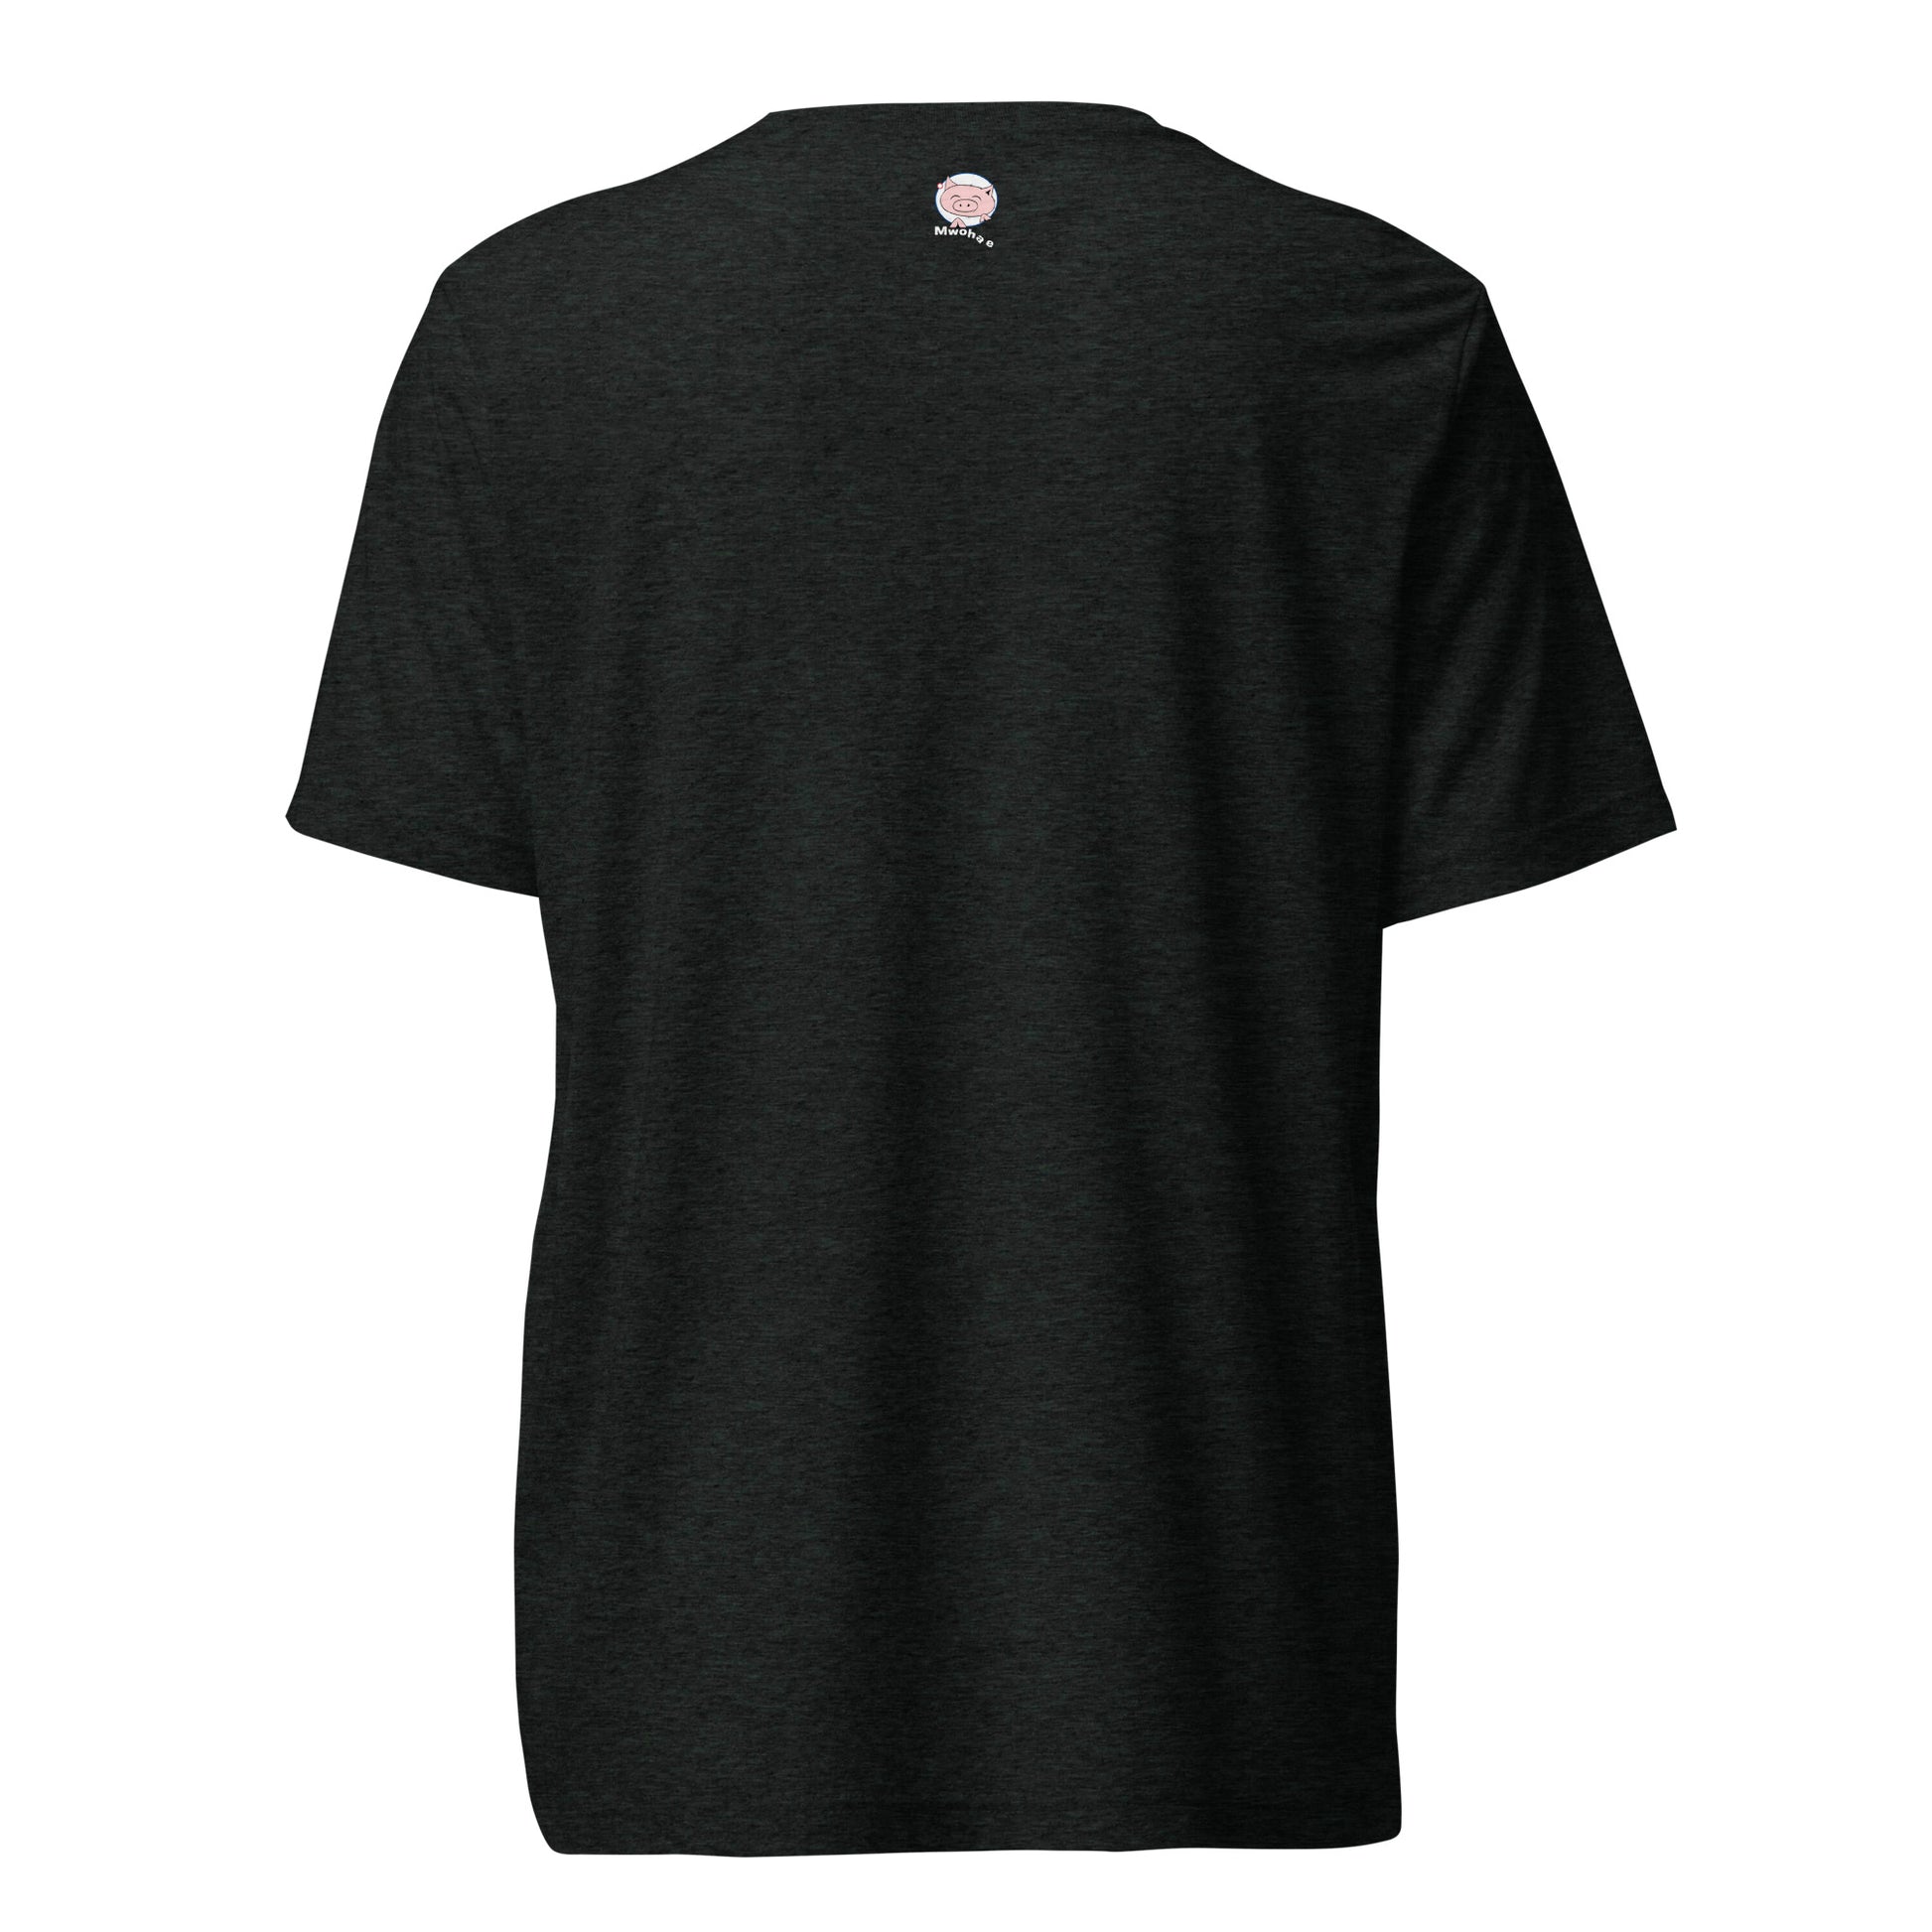 Charcoal black T-shirt with small Mwohae logo on the back